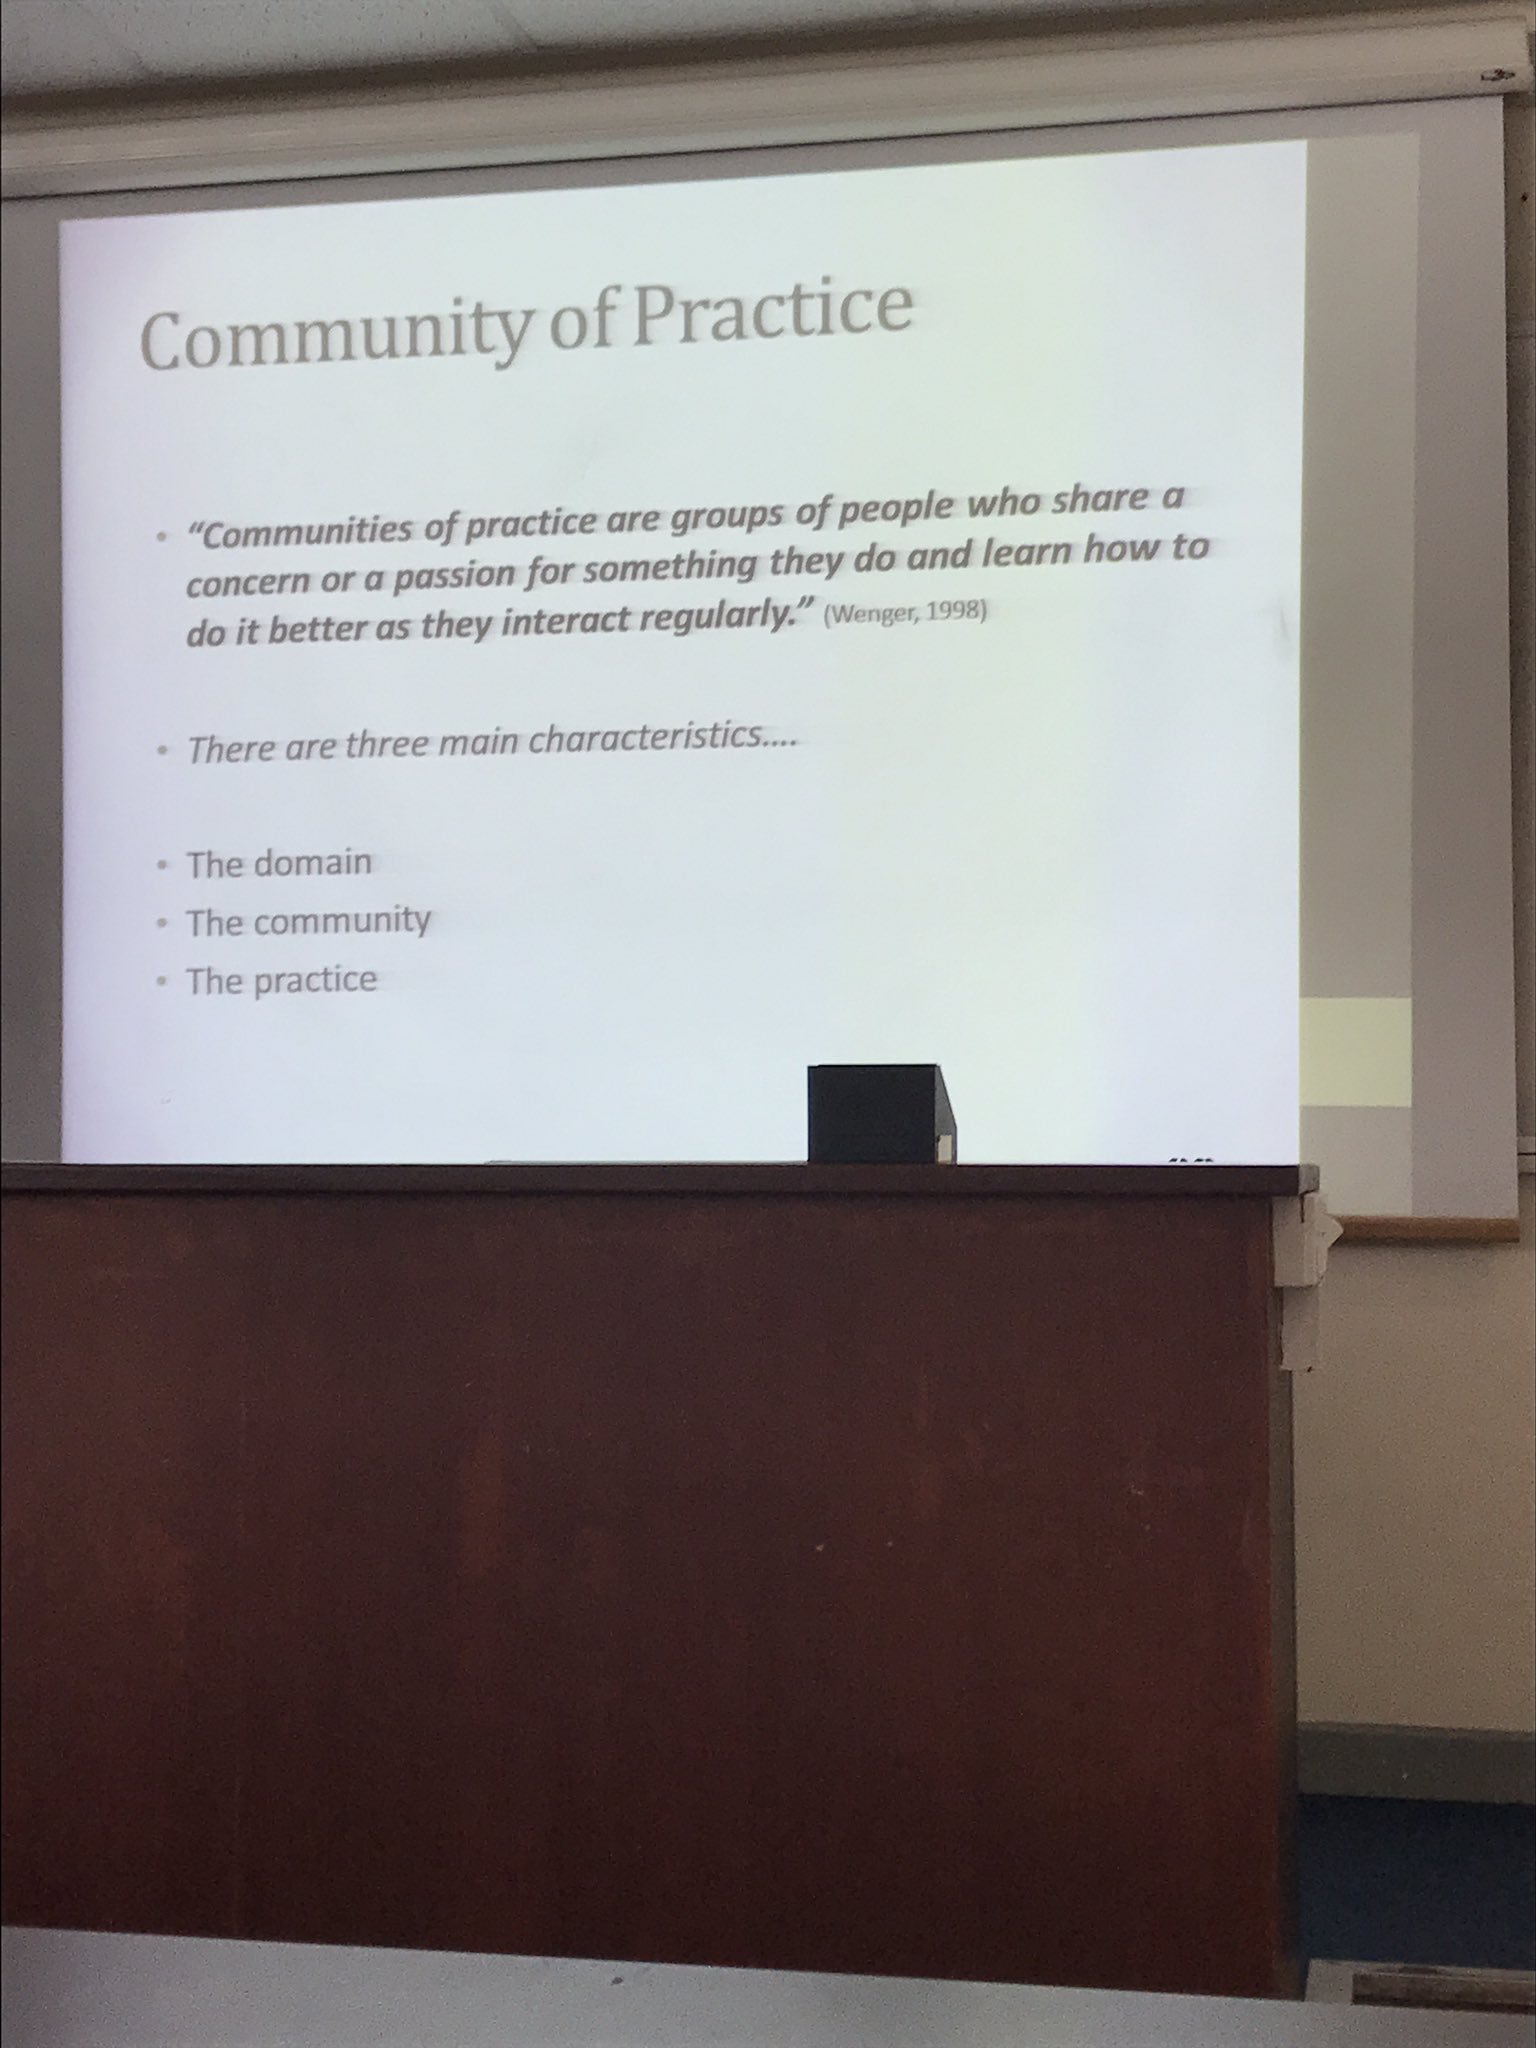 @SusanneDarra talks about developing a community of practice in developing new BSc program #Susalt17 @SwanseaUni https://t.co/LAqYMYhlIw